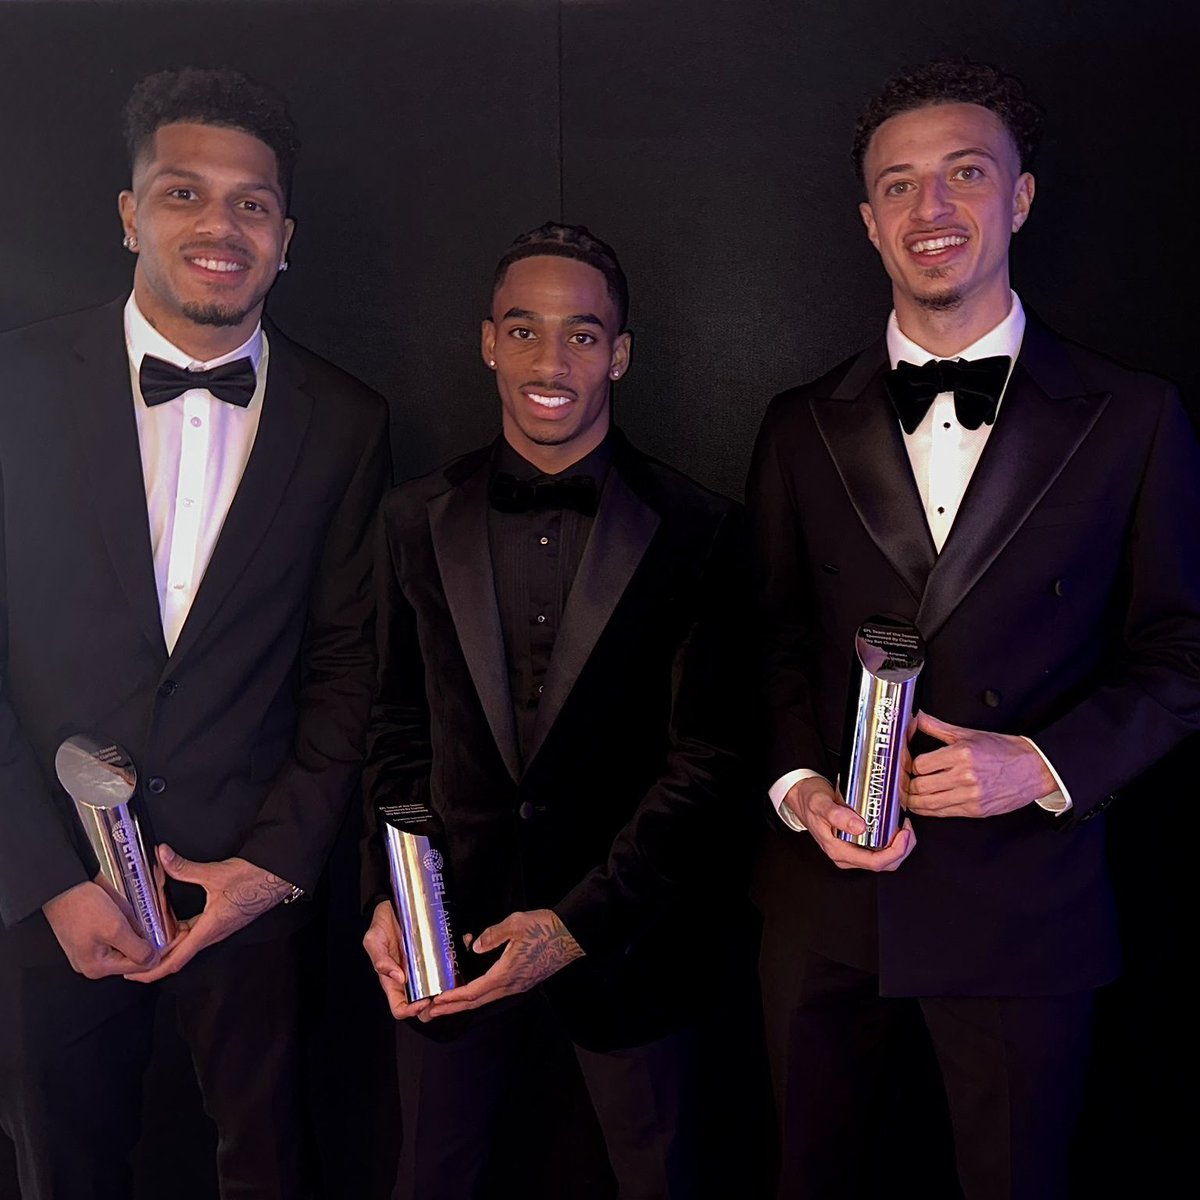 Leeds United Championship awards at the #EFLAwards: 

Young player - Archie Gray
Apprentice - Archie Gray
Team of the season - Ethan Ampadu, Crysencio Summerville and Georginio Rutter
Player - Crysencio Summerville

Awards everywhere. Just need to finish the job now.

#LUFC